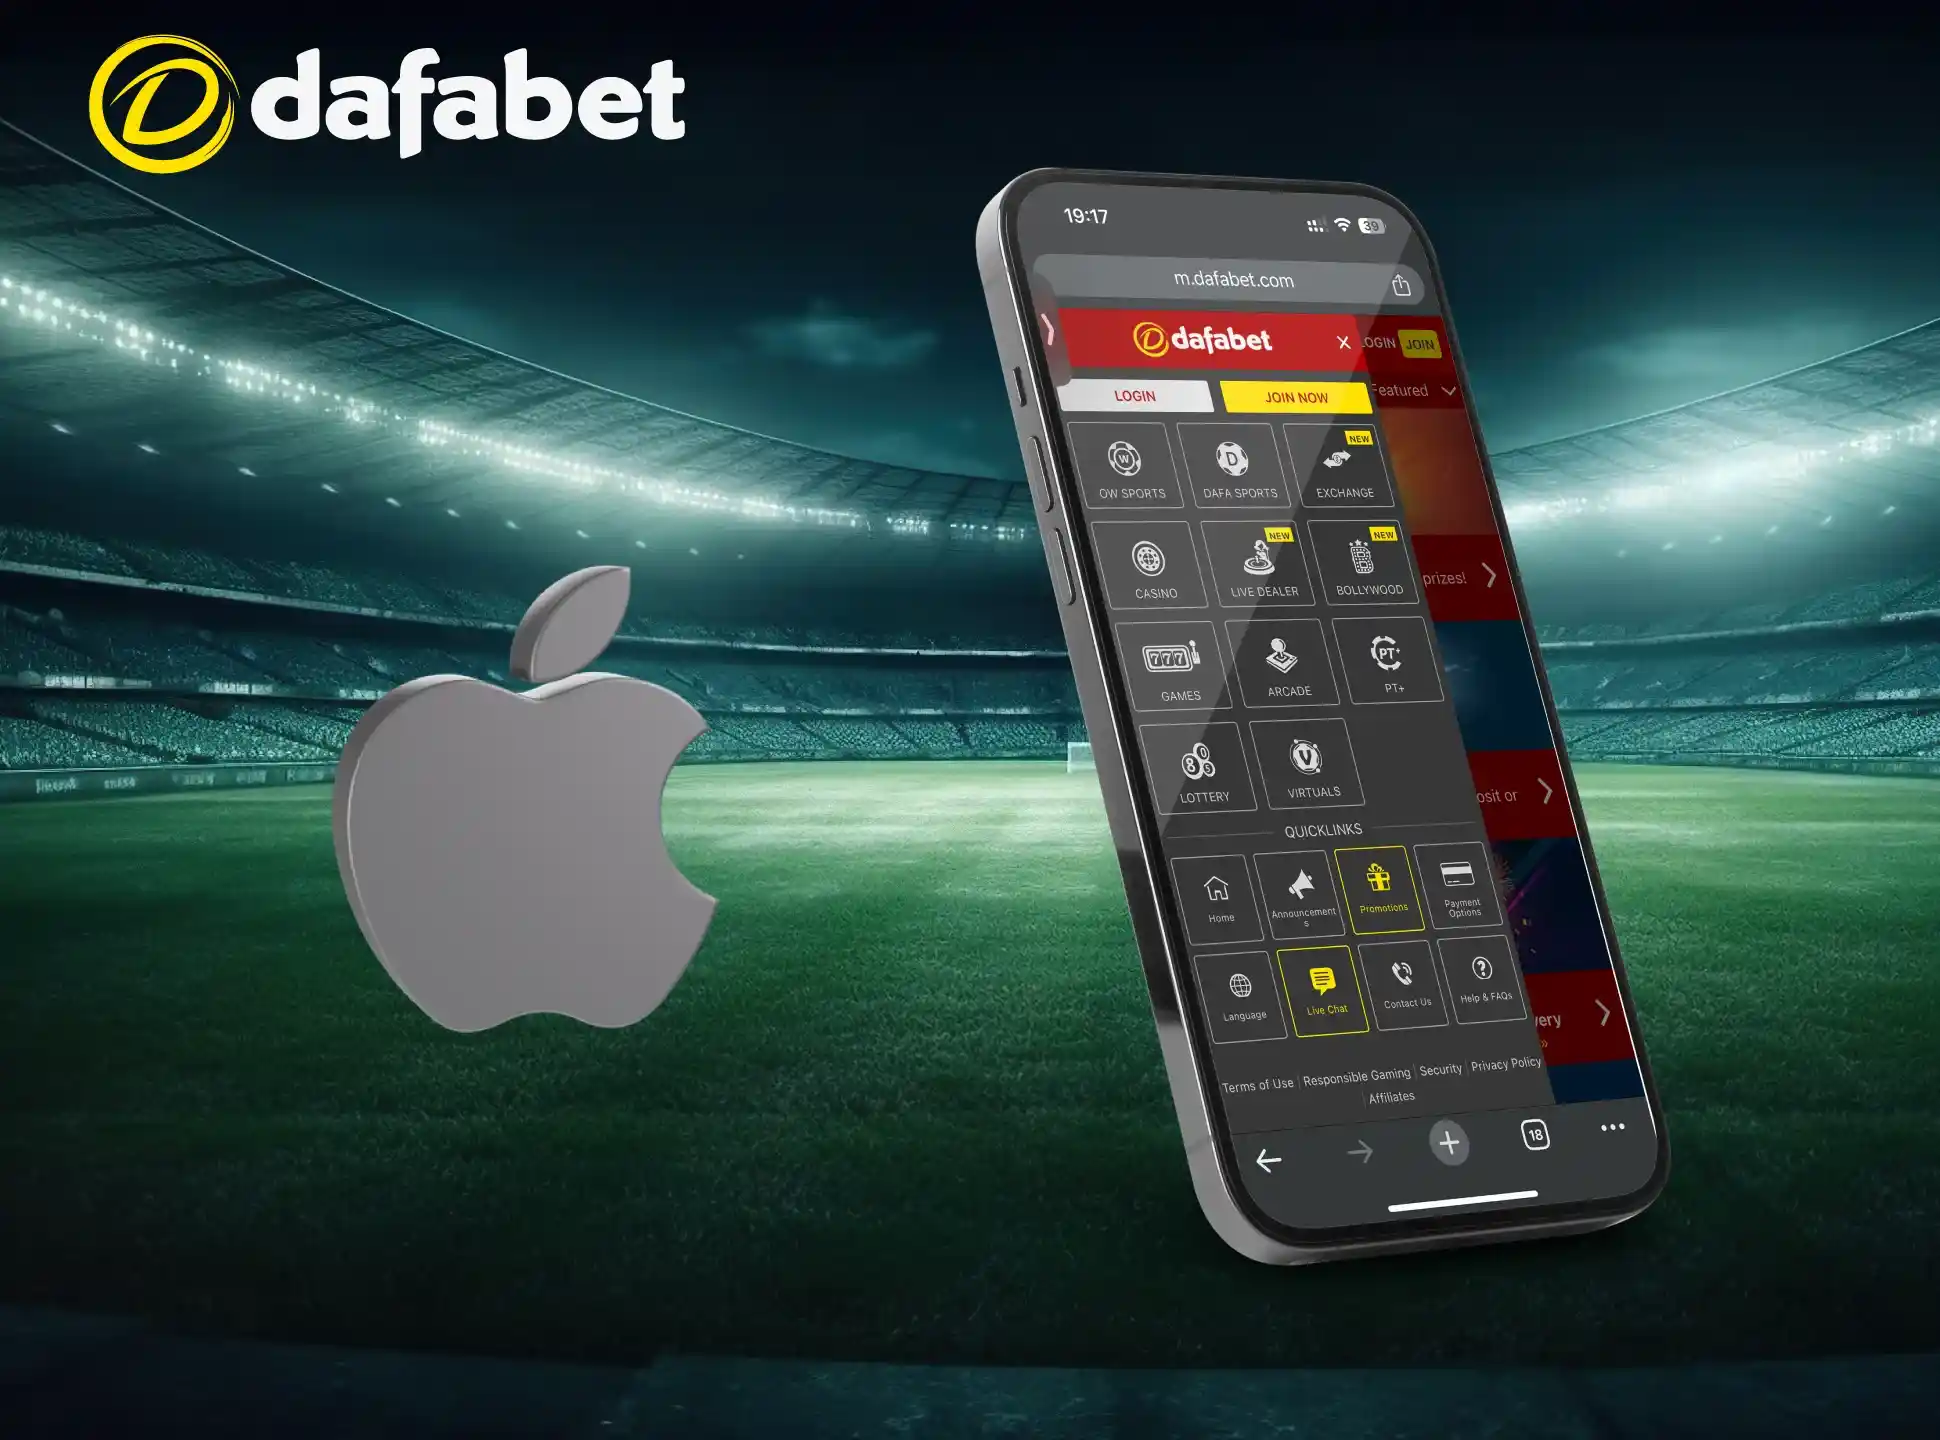 On the website, select Download Dafabet for iOS.